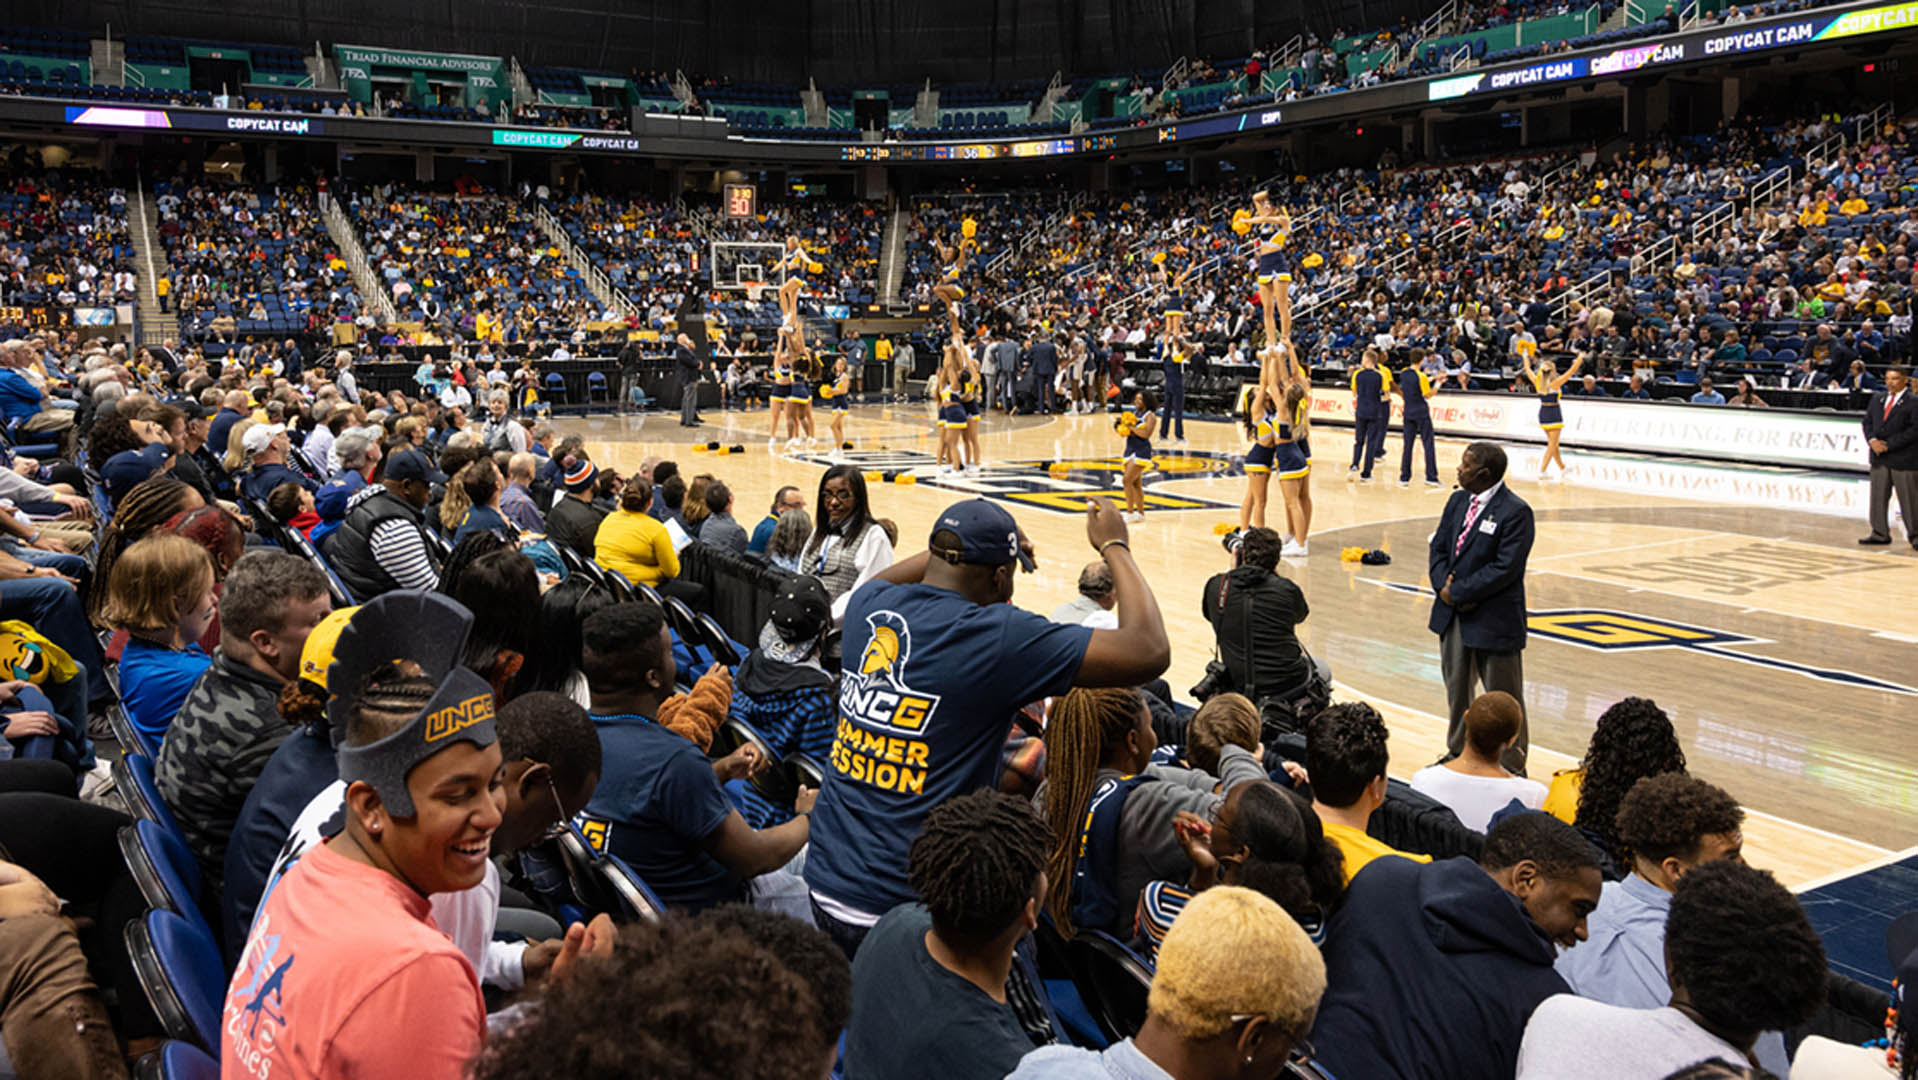 UNCG students clap while the cheerleading team performs on court during a men’s basketball game at the Greensboro Coliseum.